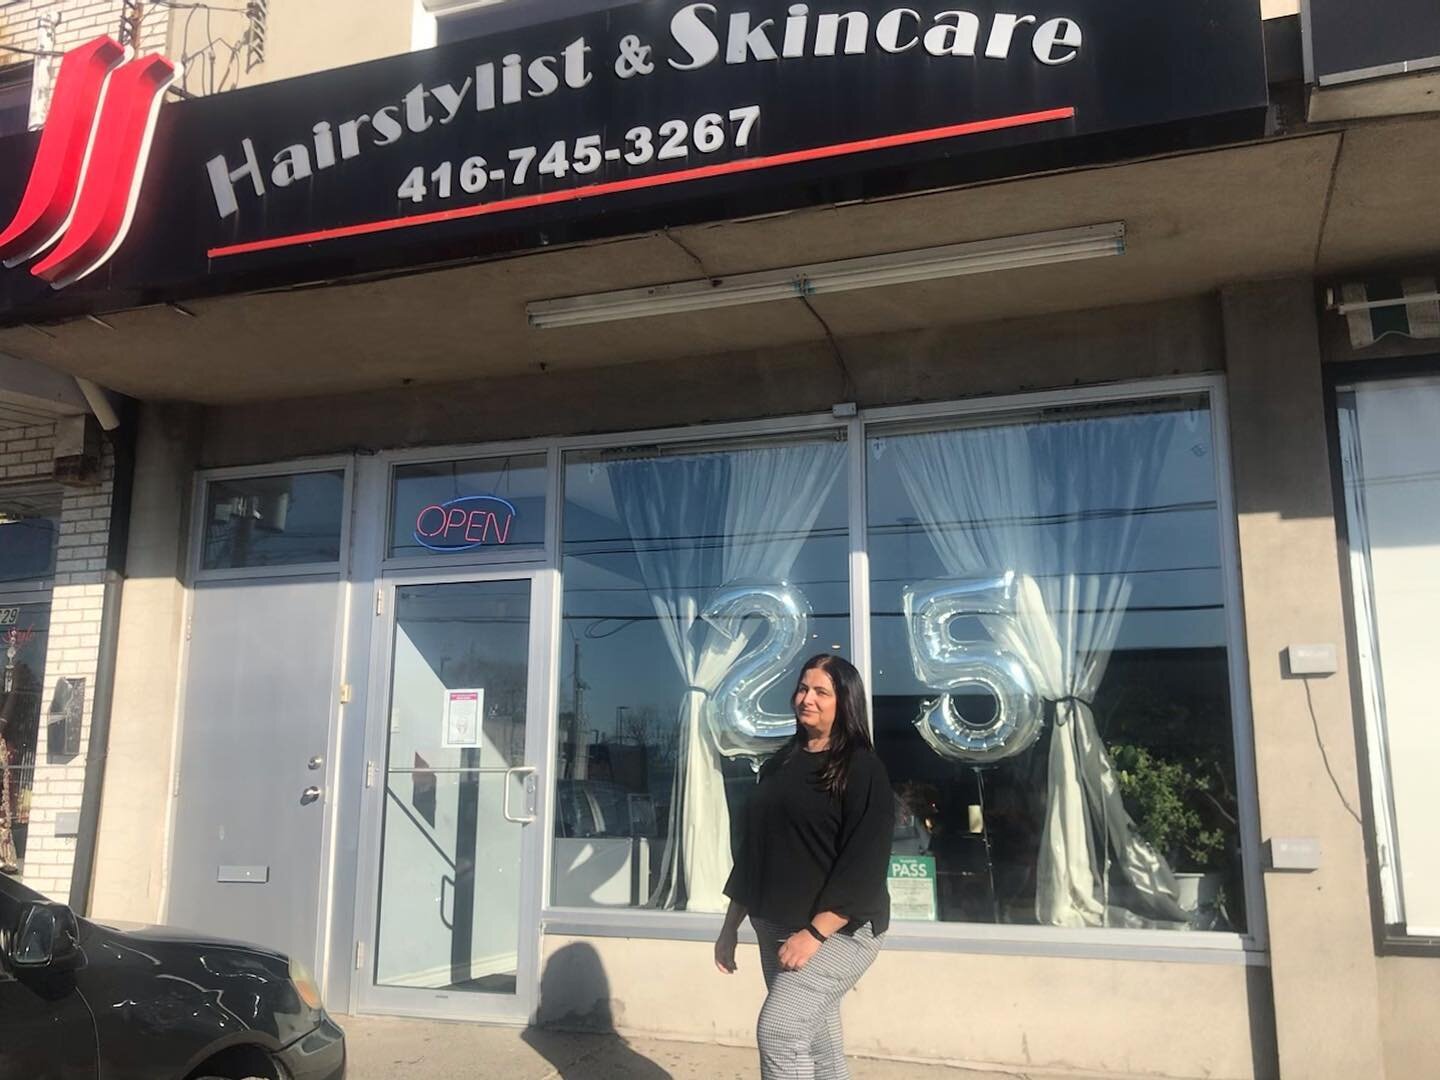 25 years ago today, we started a journey into beauty in North Etobicoke. Grateful for all the support I got from my entire family then, and the continuing support today. The success of Jjs is a team effort, which includes the past &amp; present staff